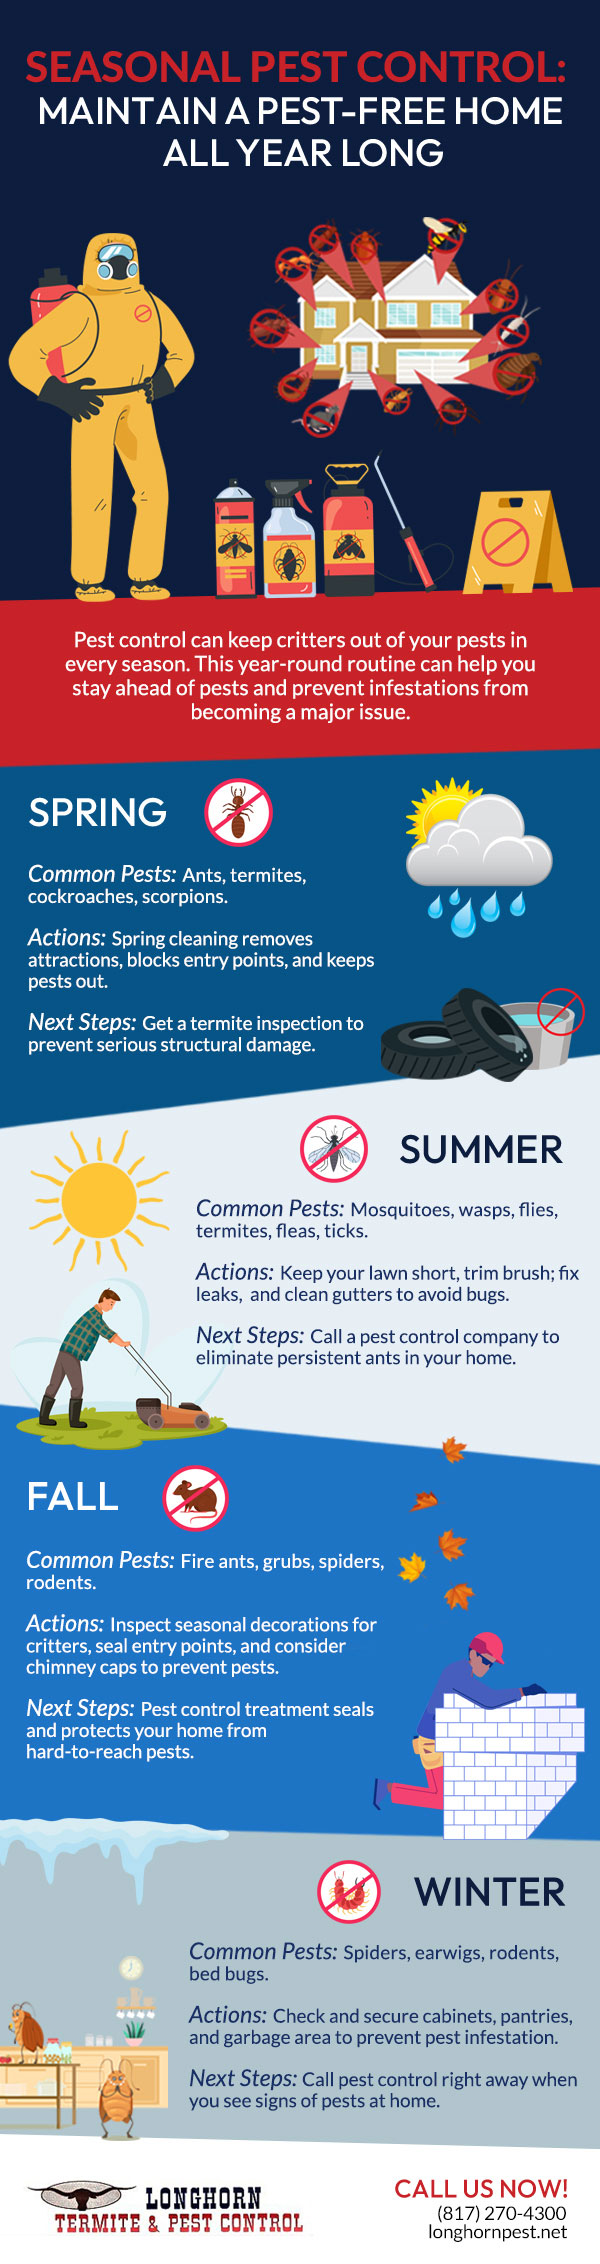 Seasonal Pest Control: Maintain a Pest-Free Home All Year Long 